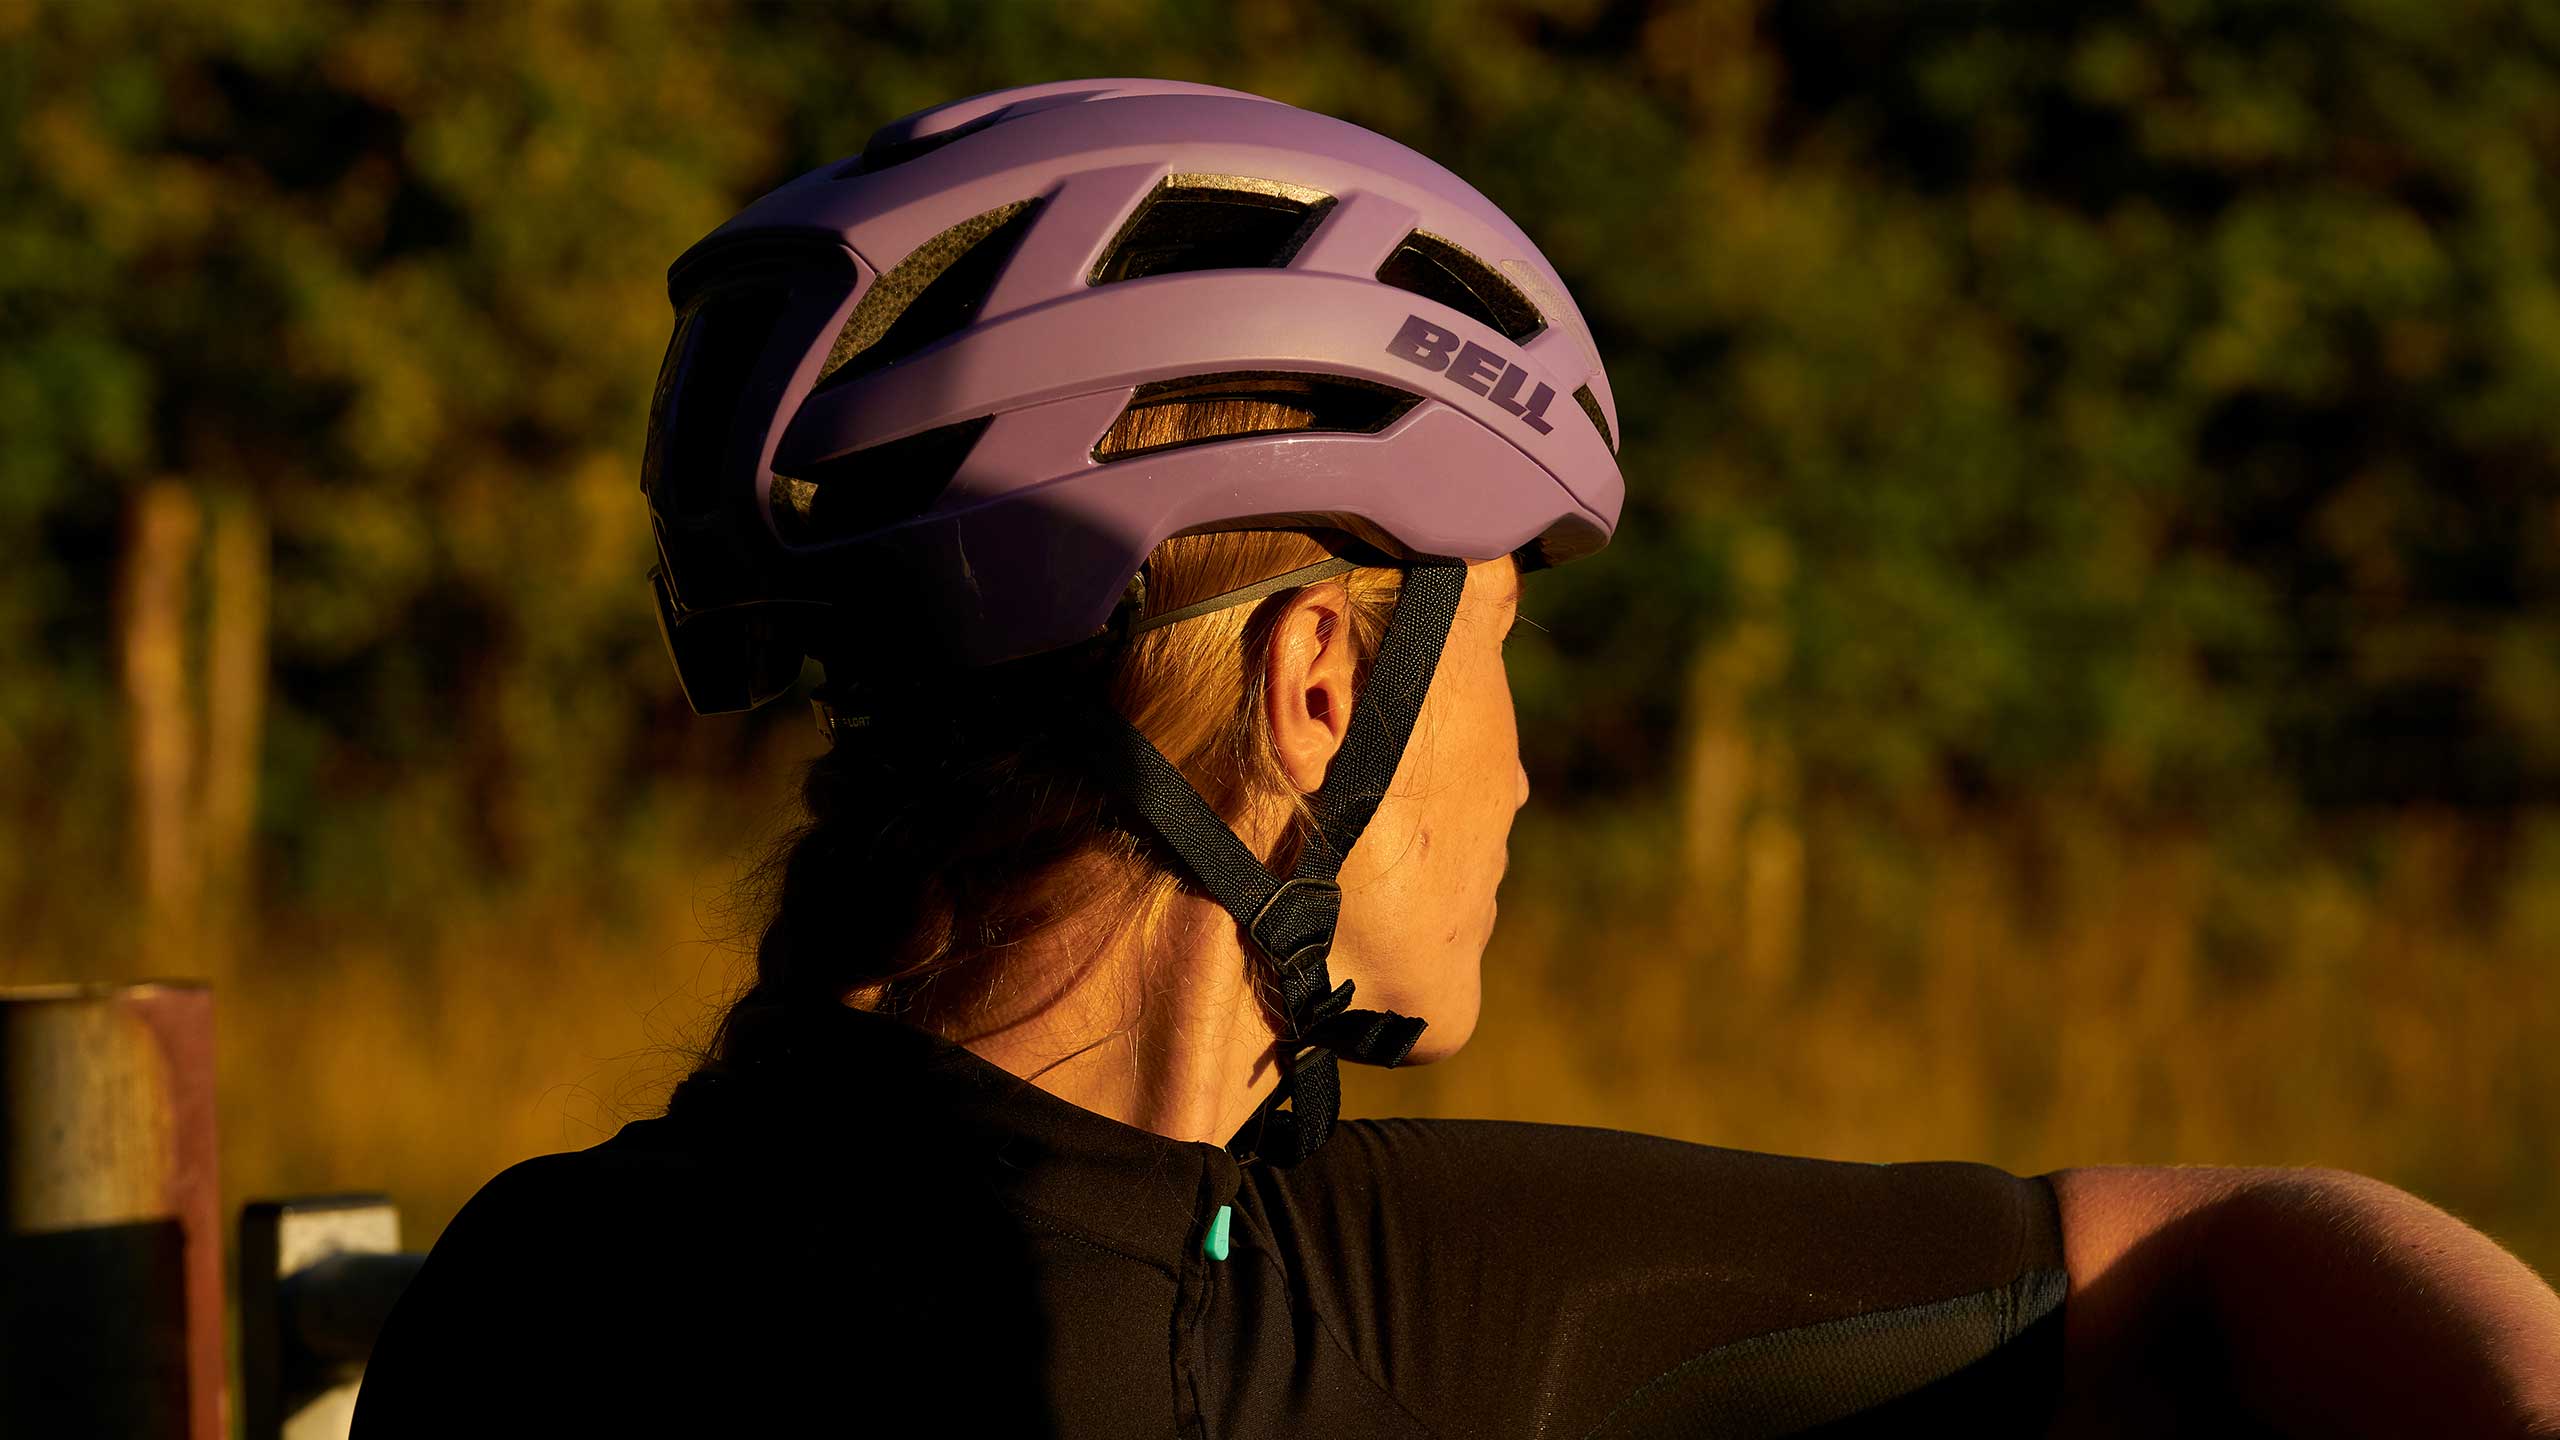 Falcon XR Helmet on a rider looking out to a sunset